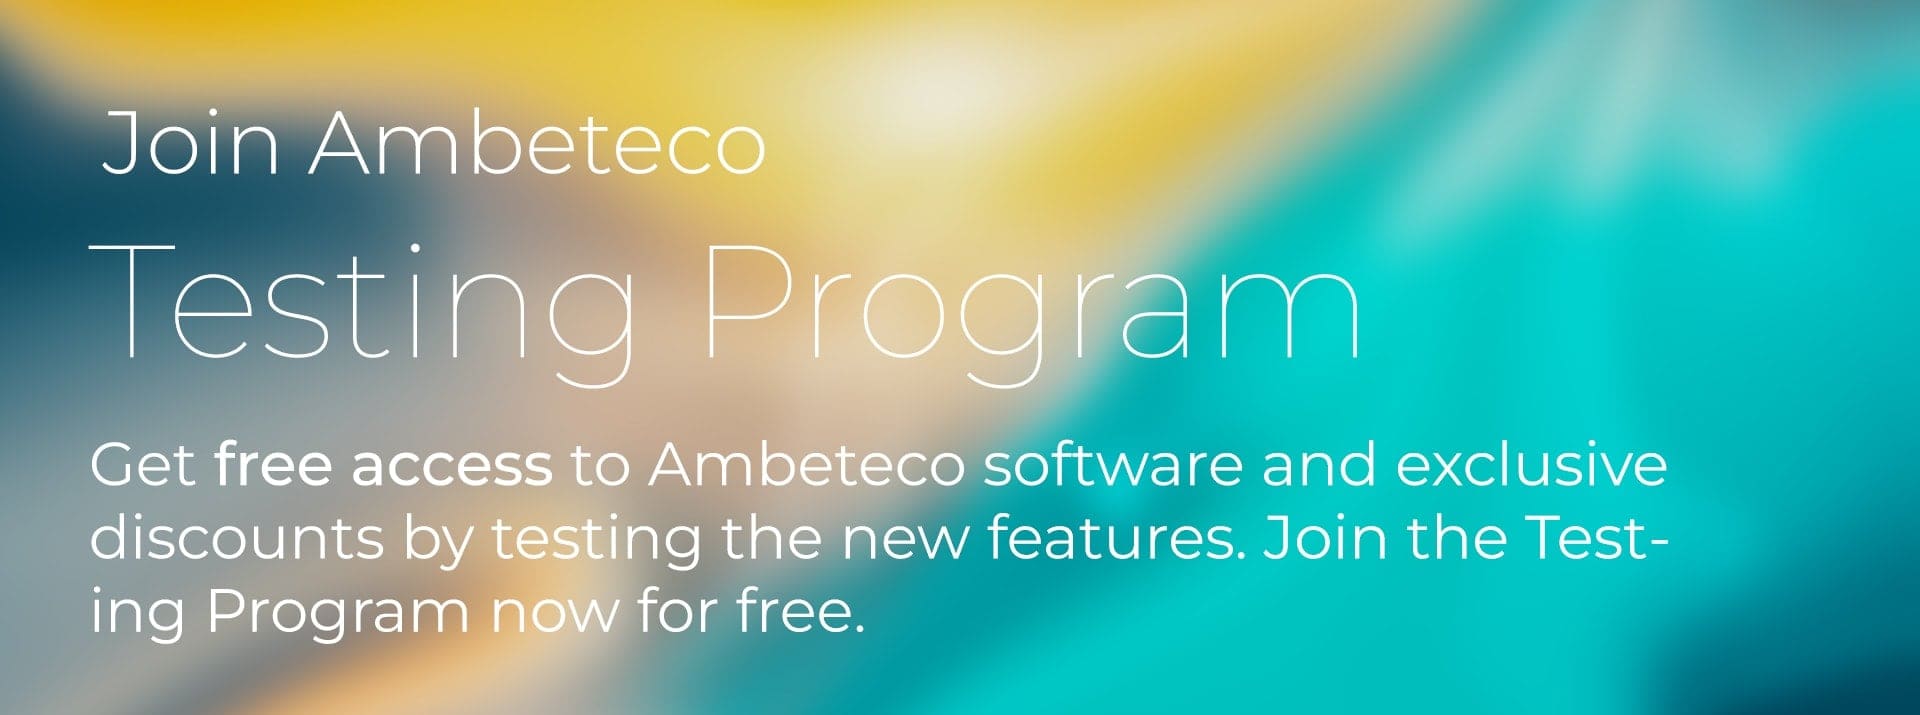 Ambeteco Testing Program banner. Join now to get free access to the Ambeteco software.